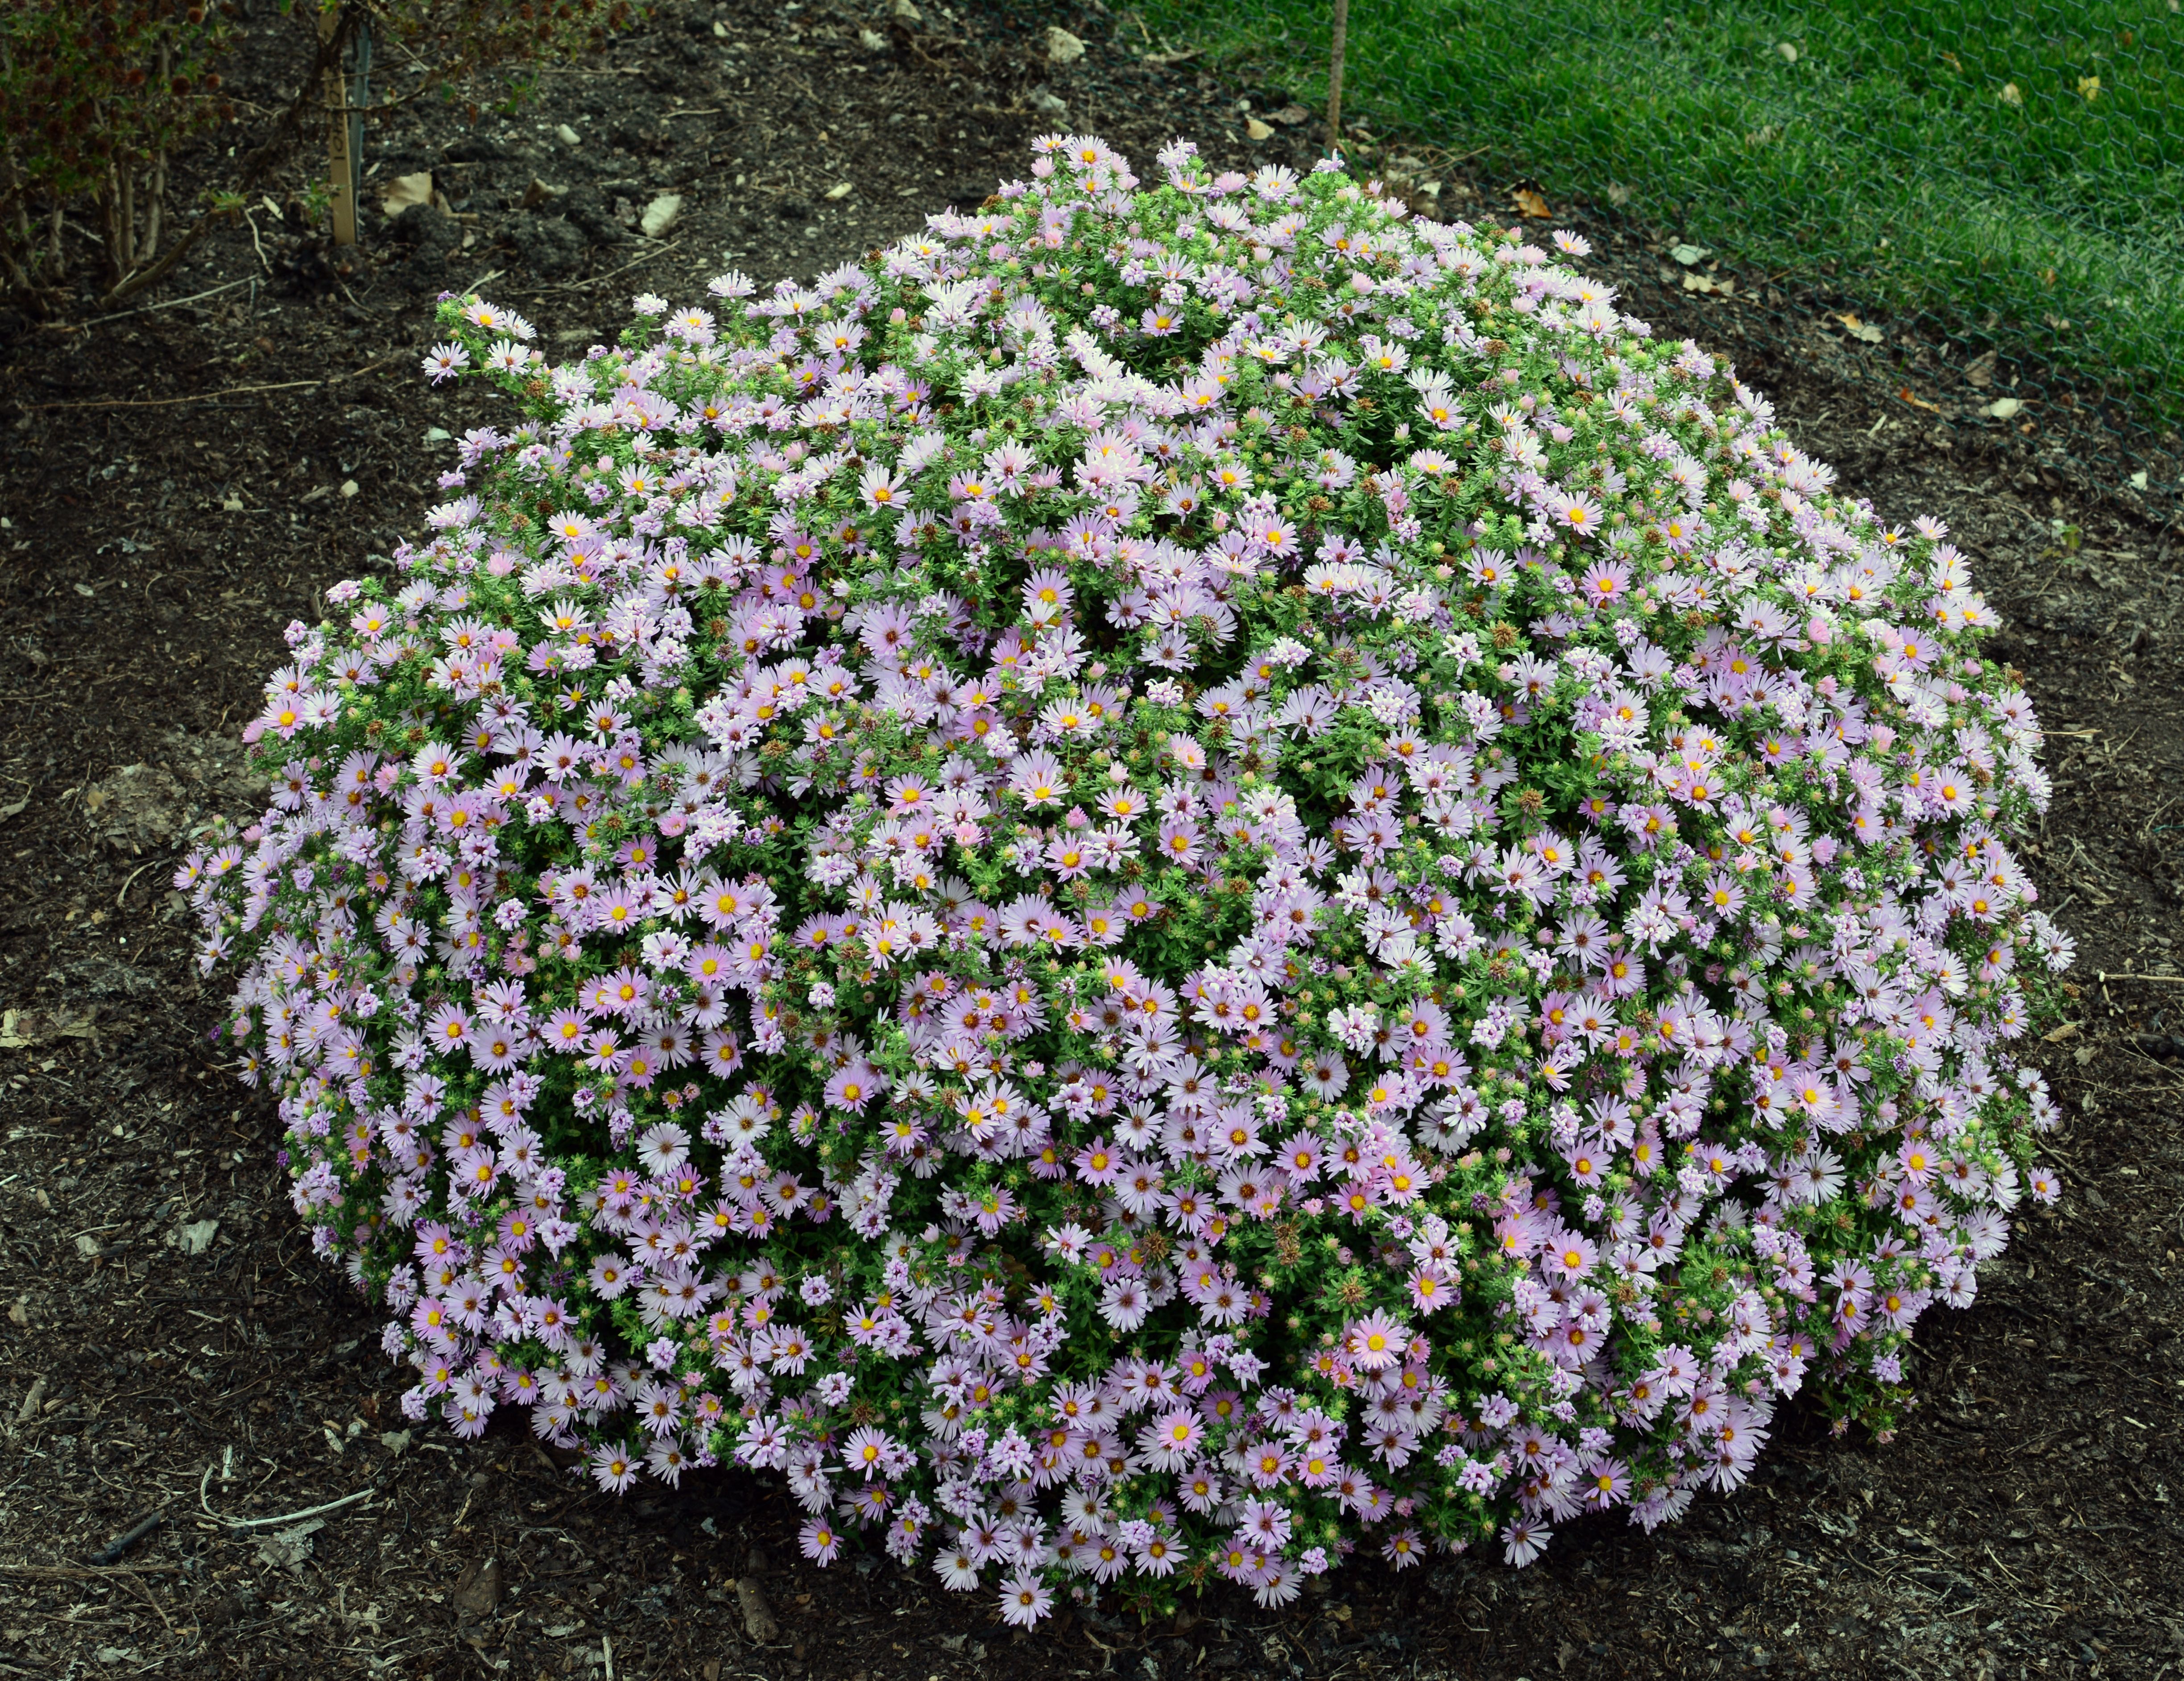 images/plants/aster/ast-billowing-pink/ast-billowing-pink-0007.jpg